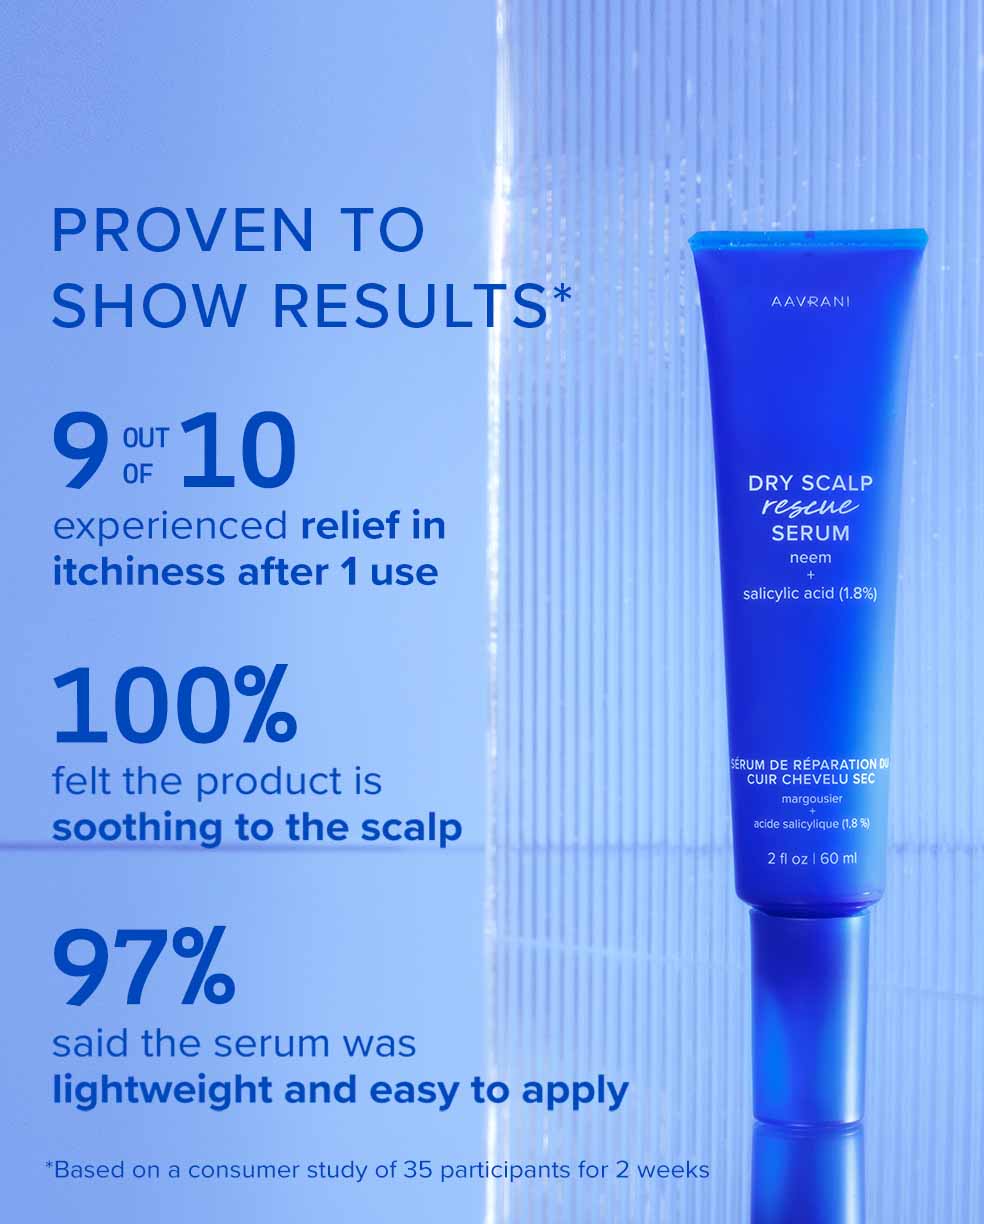 AAVRANI Dry Scalp Rescue Serum claims infographic